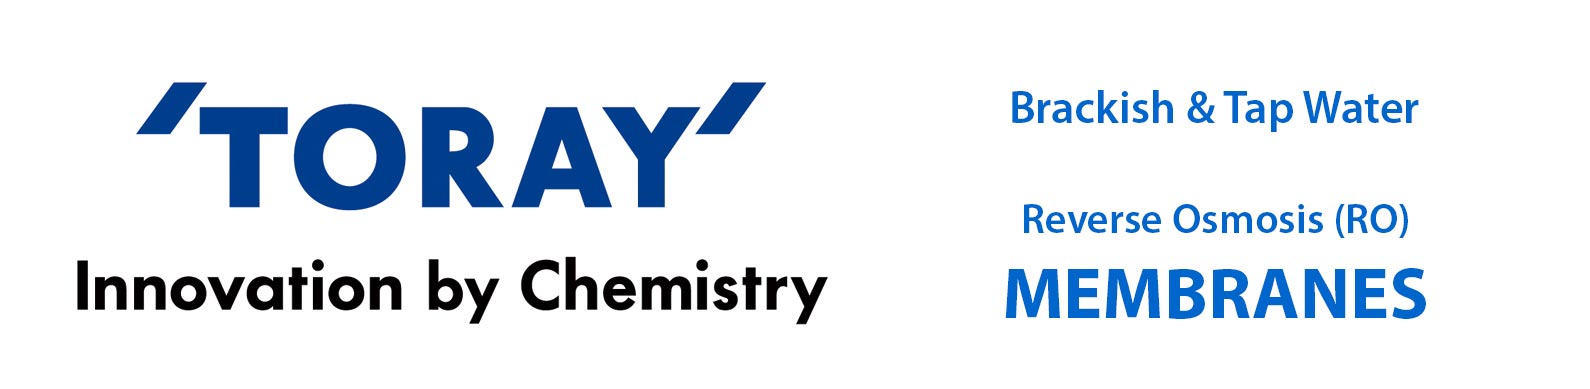 toray membranes elements parts and components